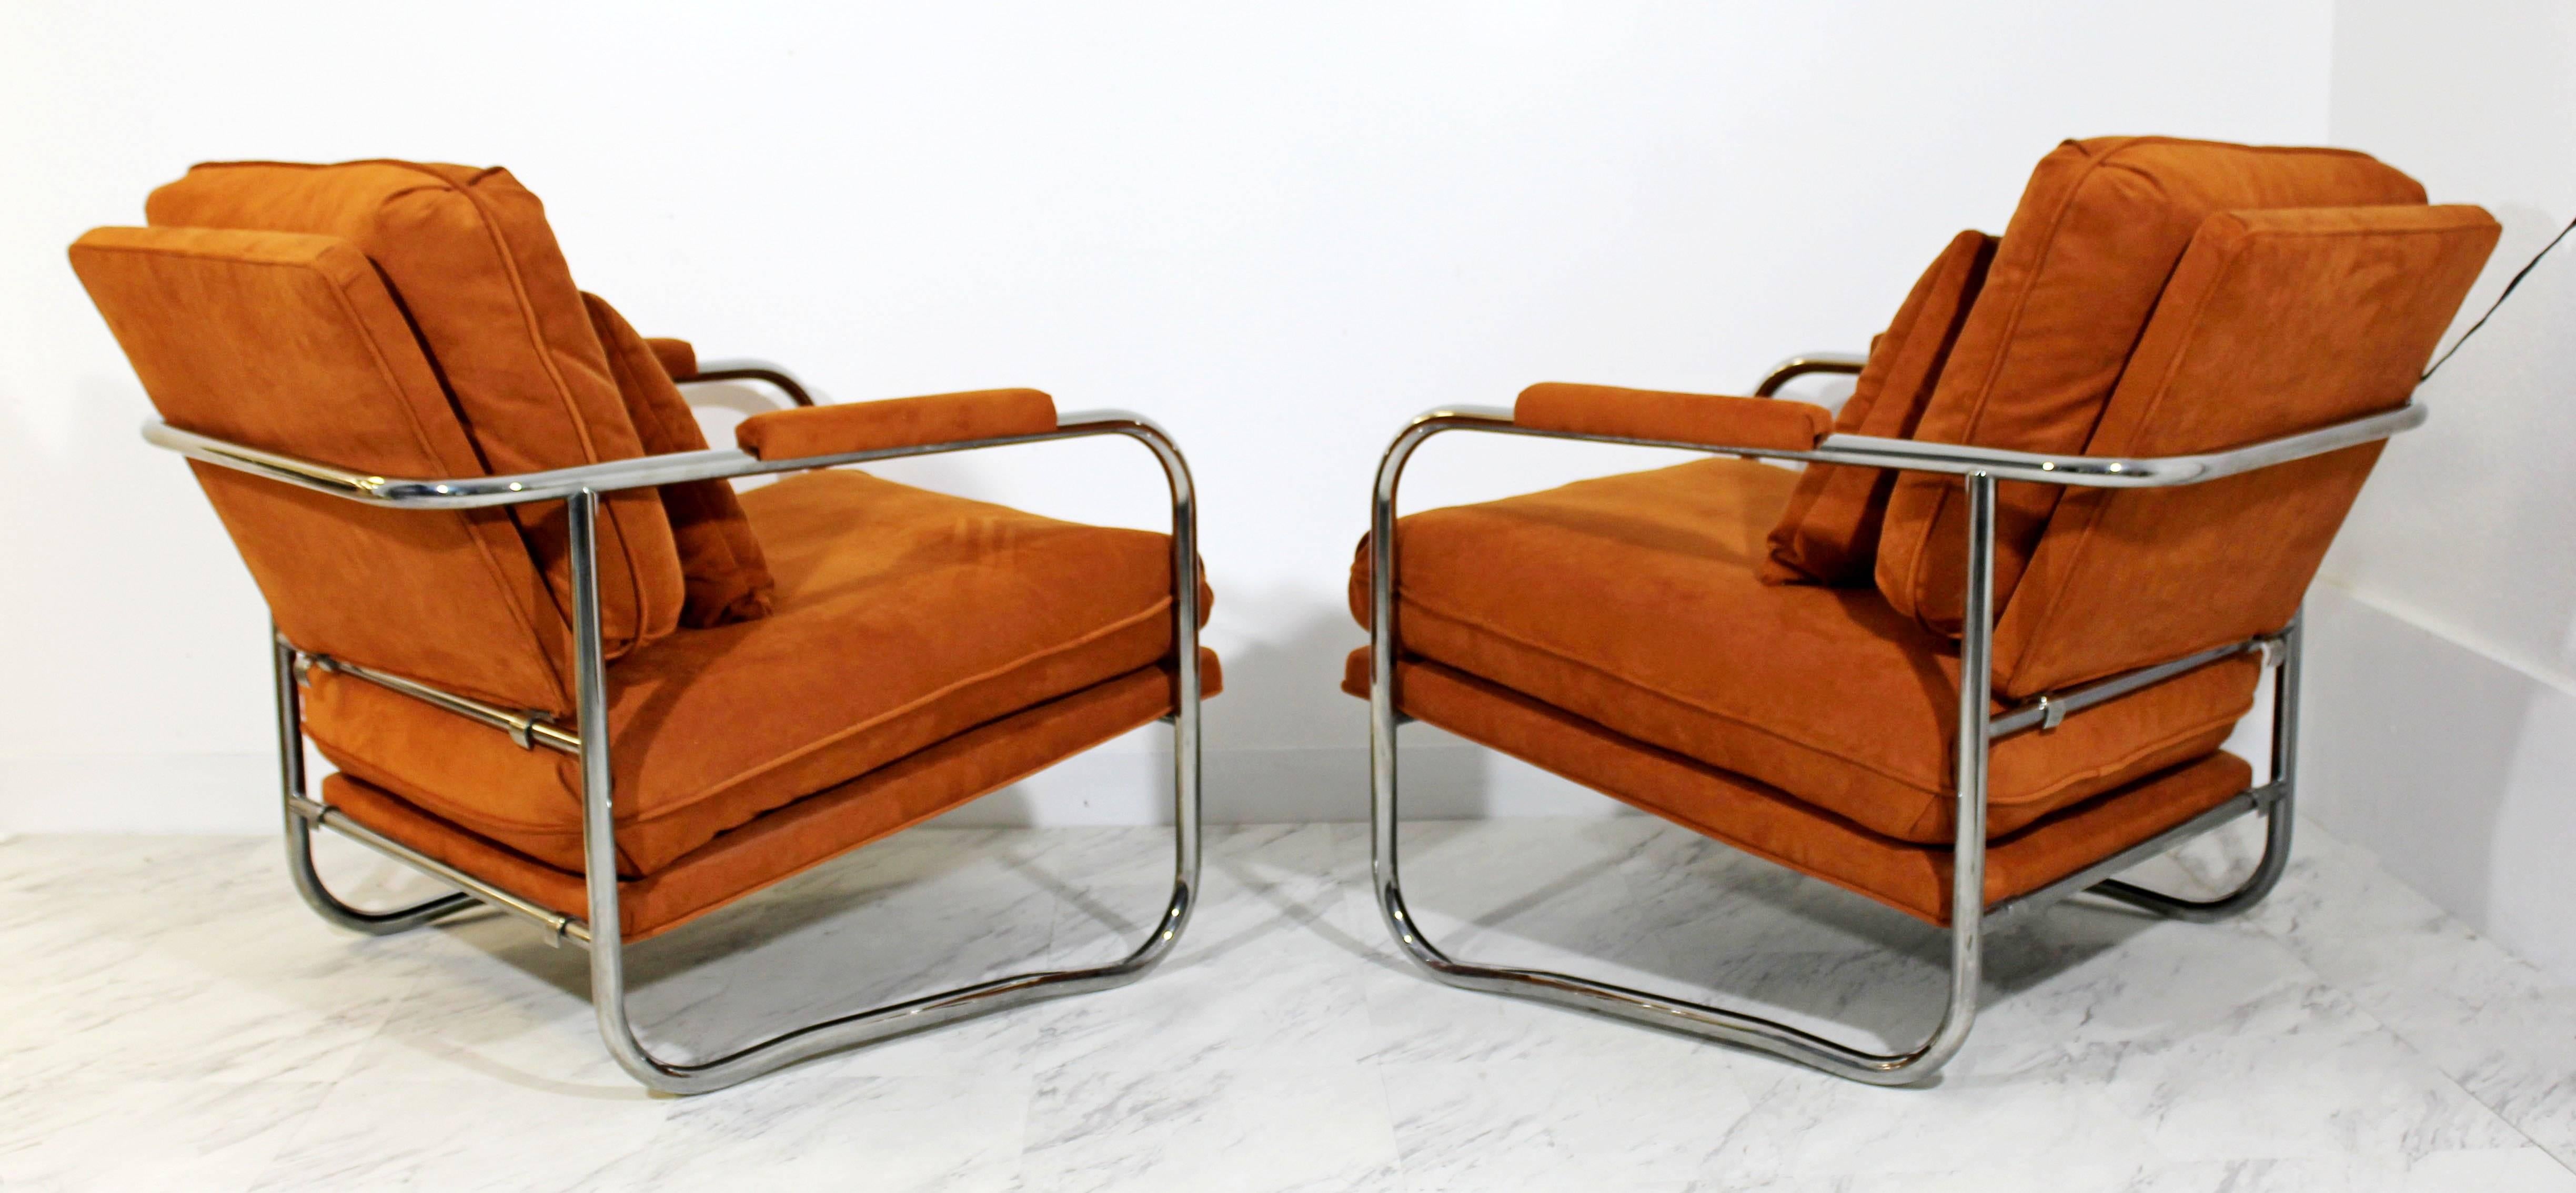 Late 20th Century Mid-Century Modern Pair of Tubular Chrome Lounge Chairs and Ottoman